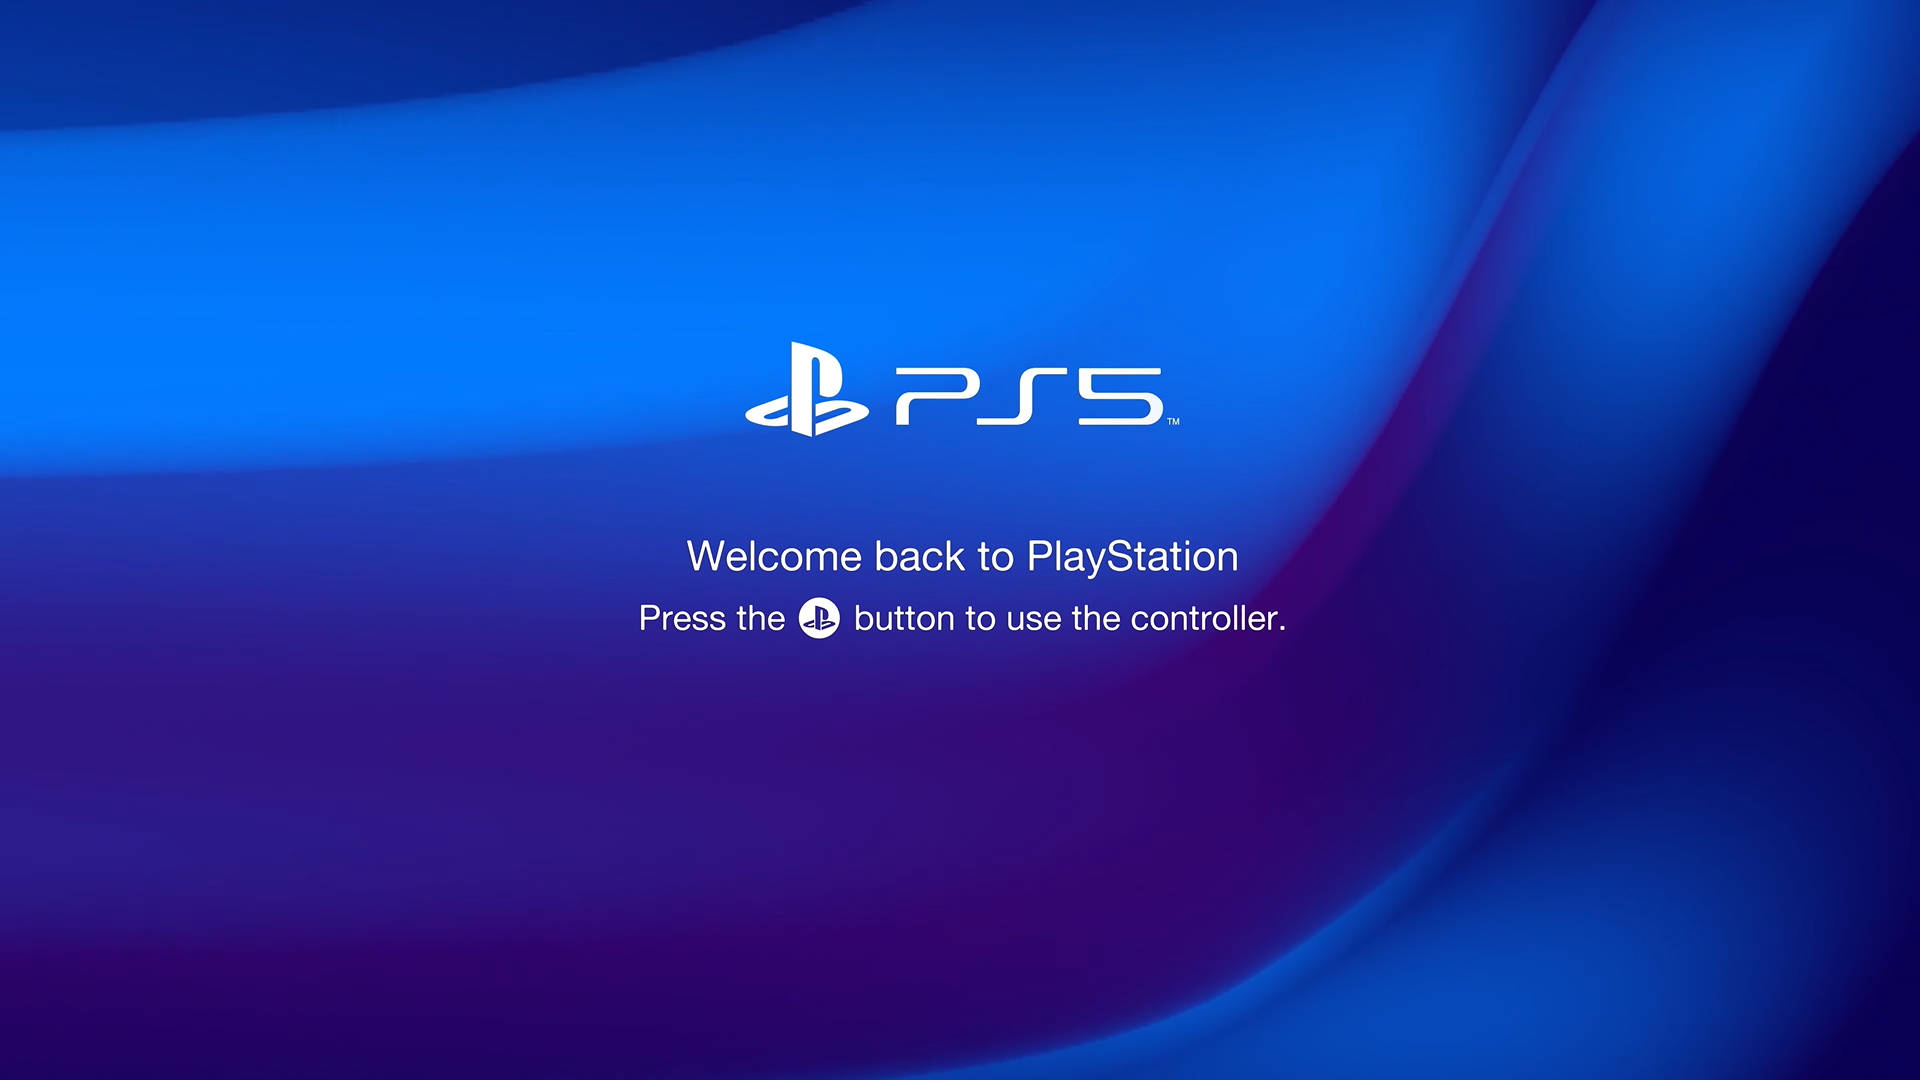 PS5 Welcome Screen Message Wallpaper